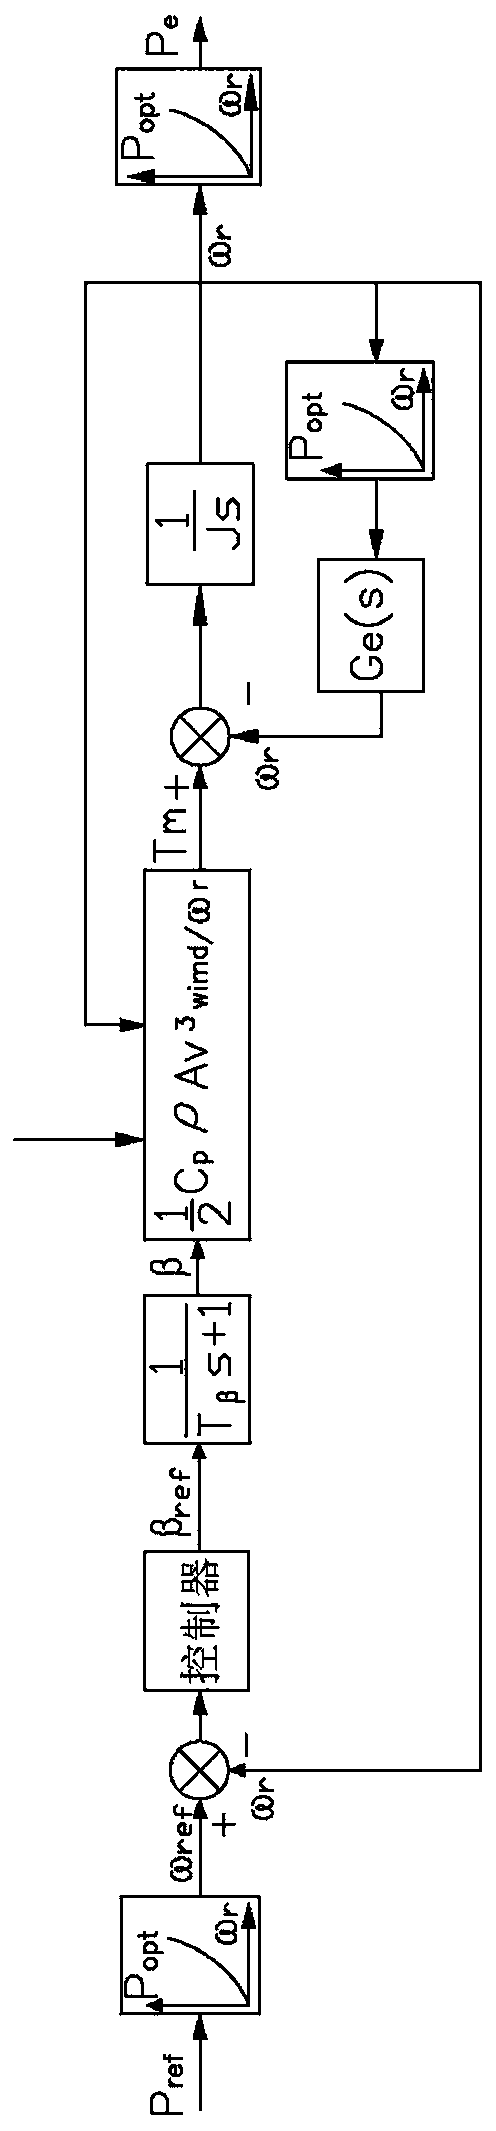 A closed-loop active power control method for wind farms